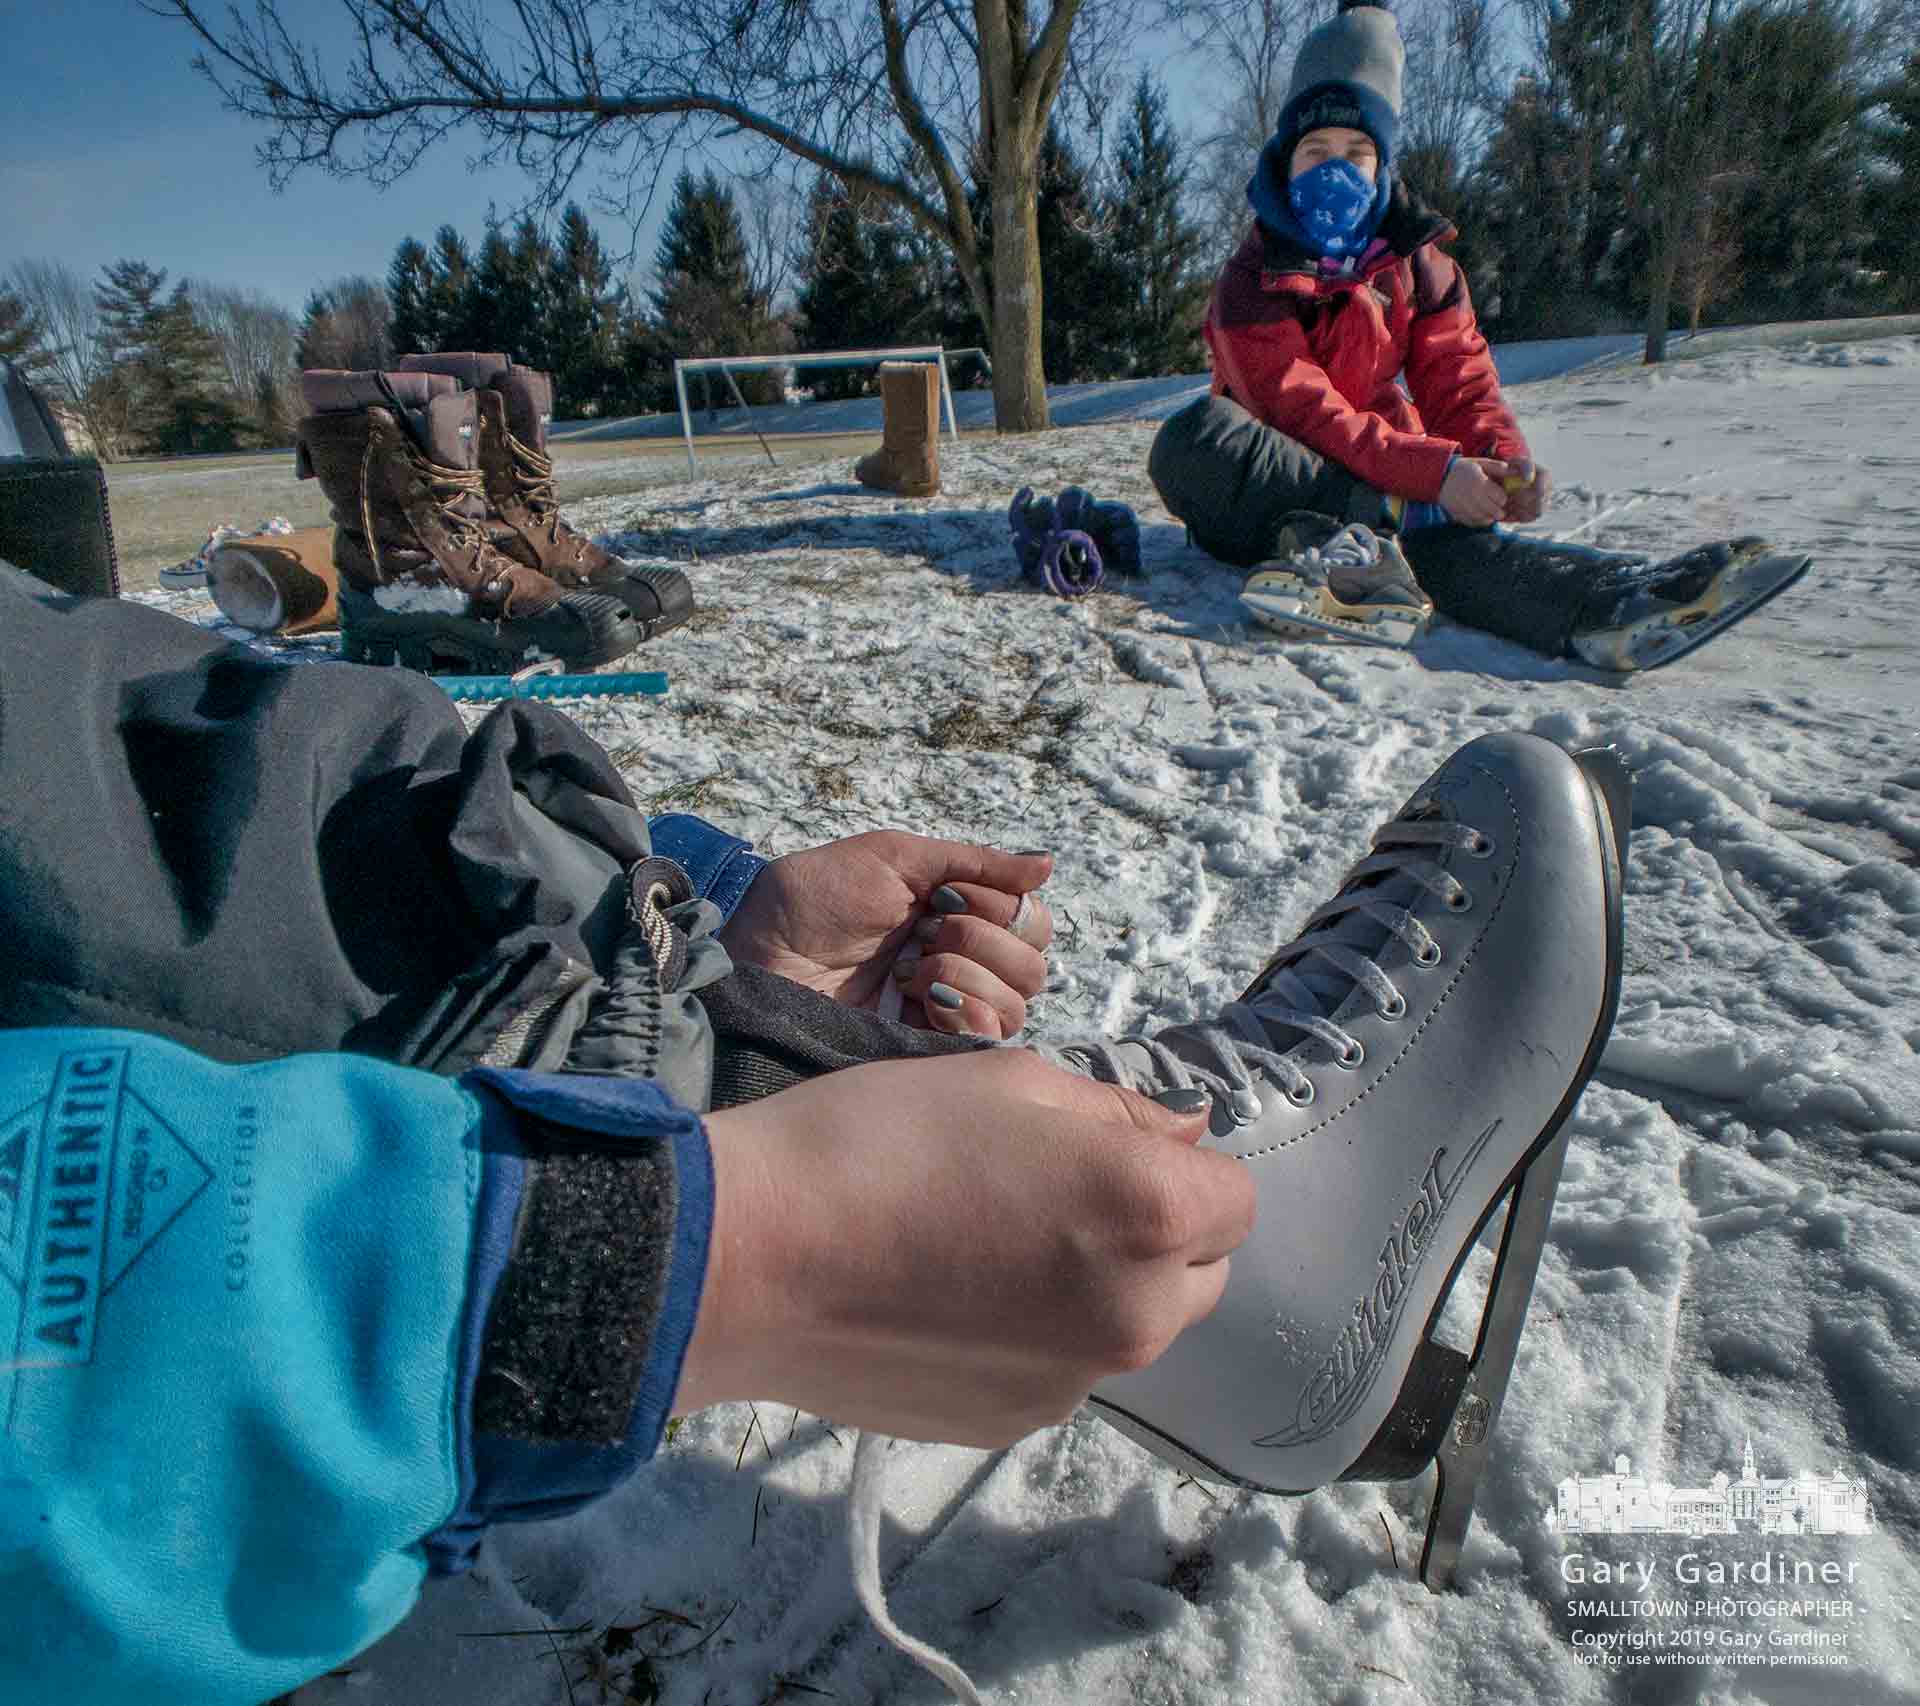 A young girl laces up her skates as she and her friends prepare to skate on the ice rink at Metzger Park. My Final Photo for Jan. 30, 2019.